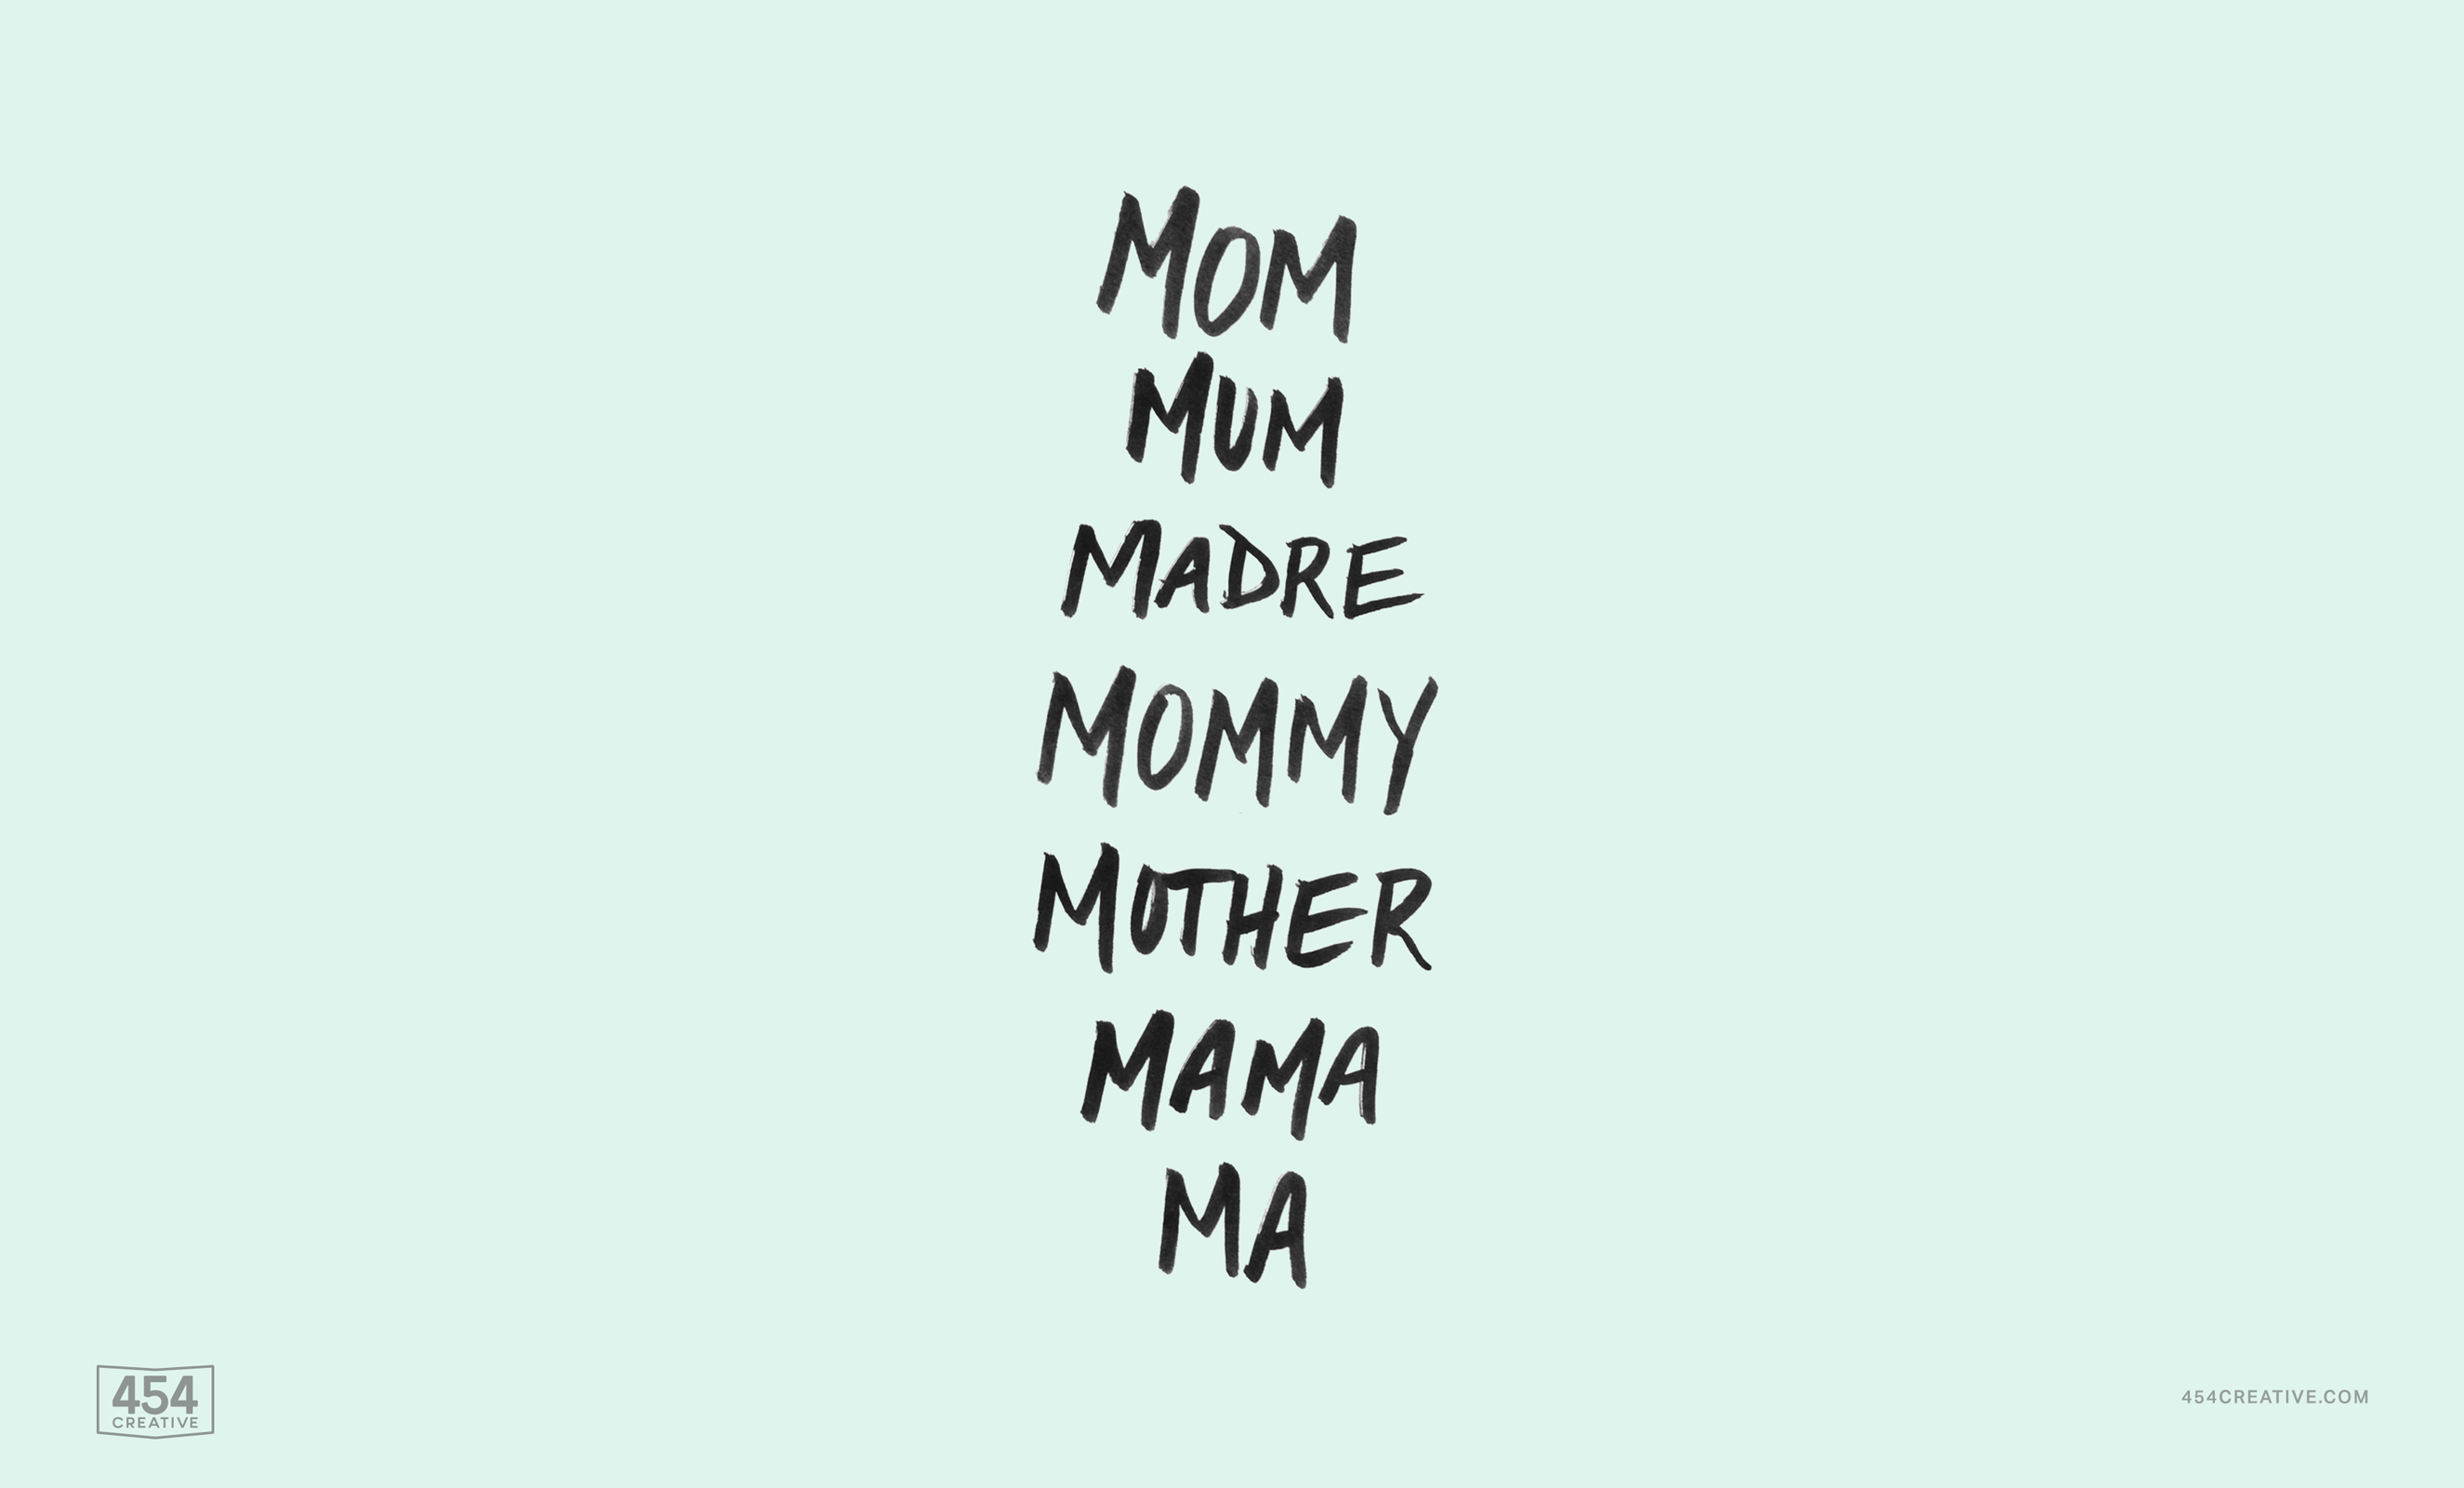 Able Mother S Day Mobile Desktop Background